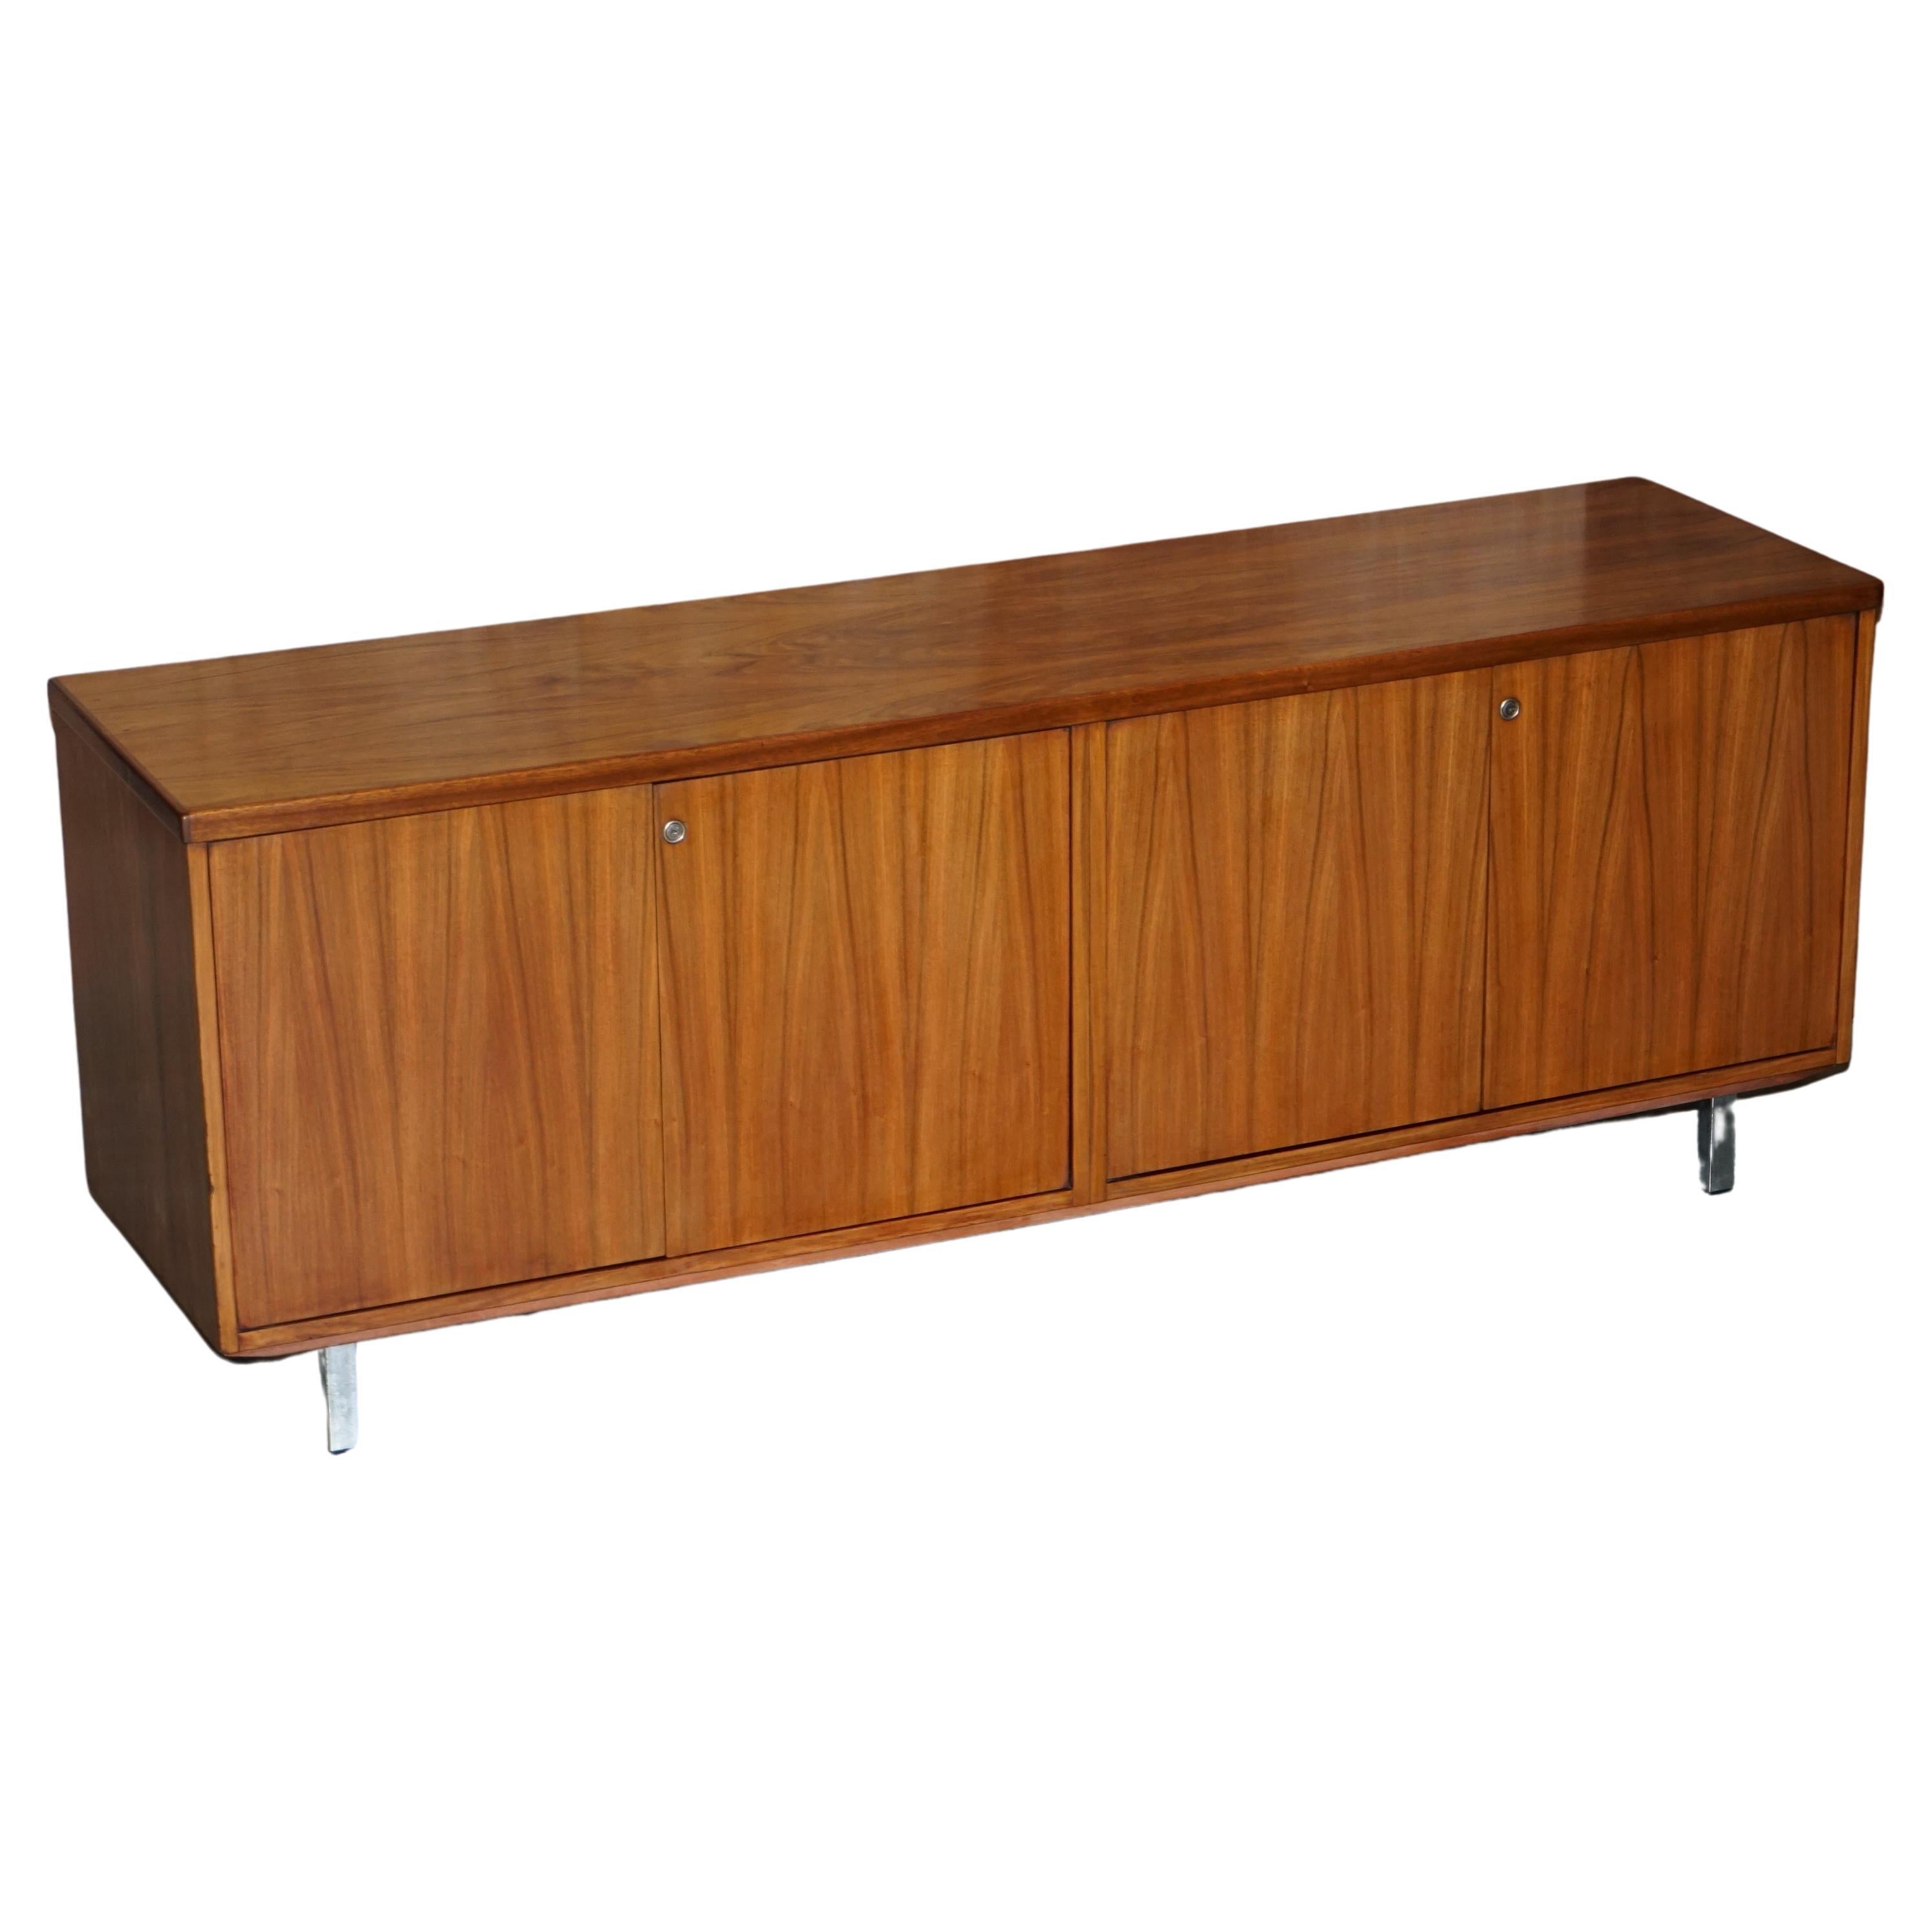 Stunning Restored Mid Century Modern Period Hardwood Sideboard with Chrome Legs For Sale